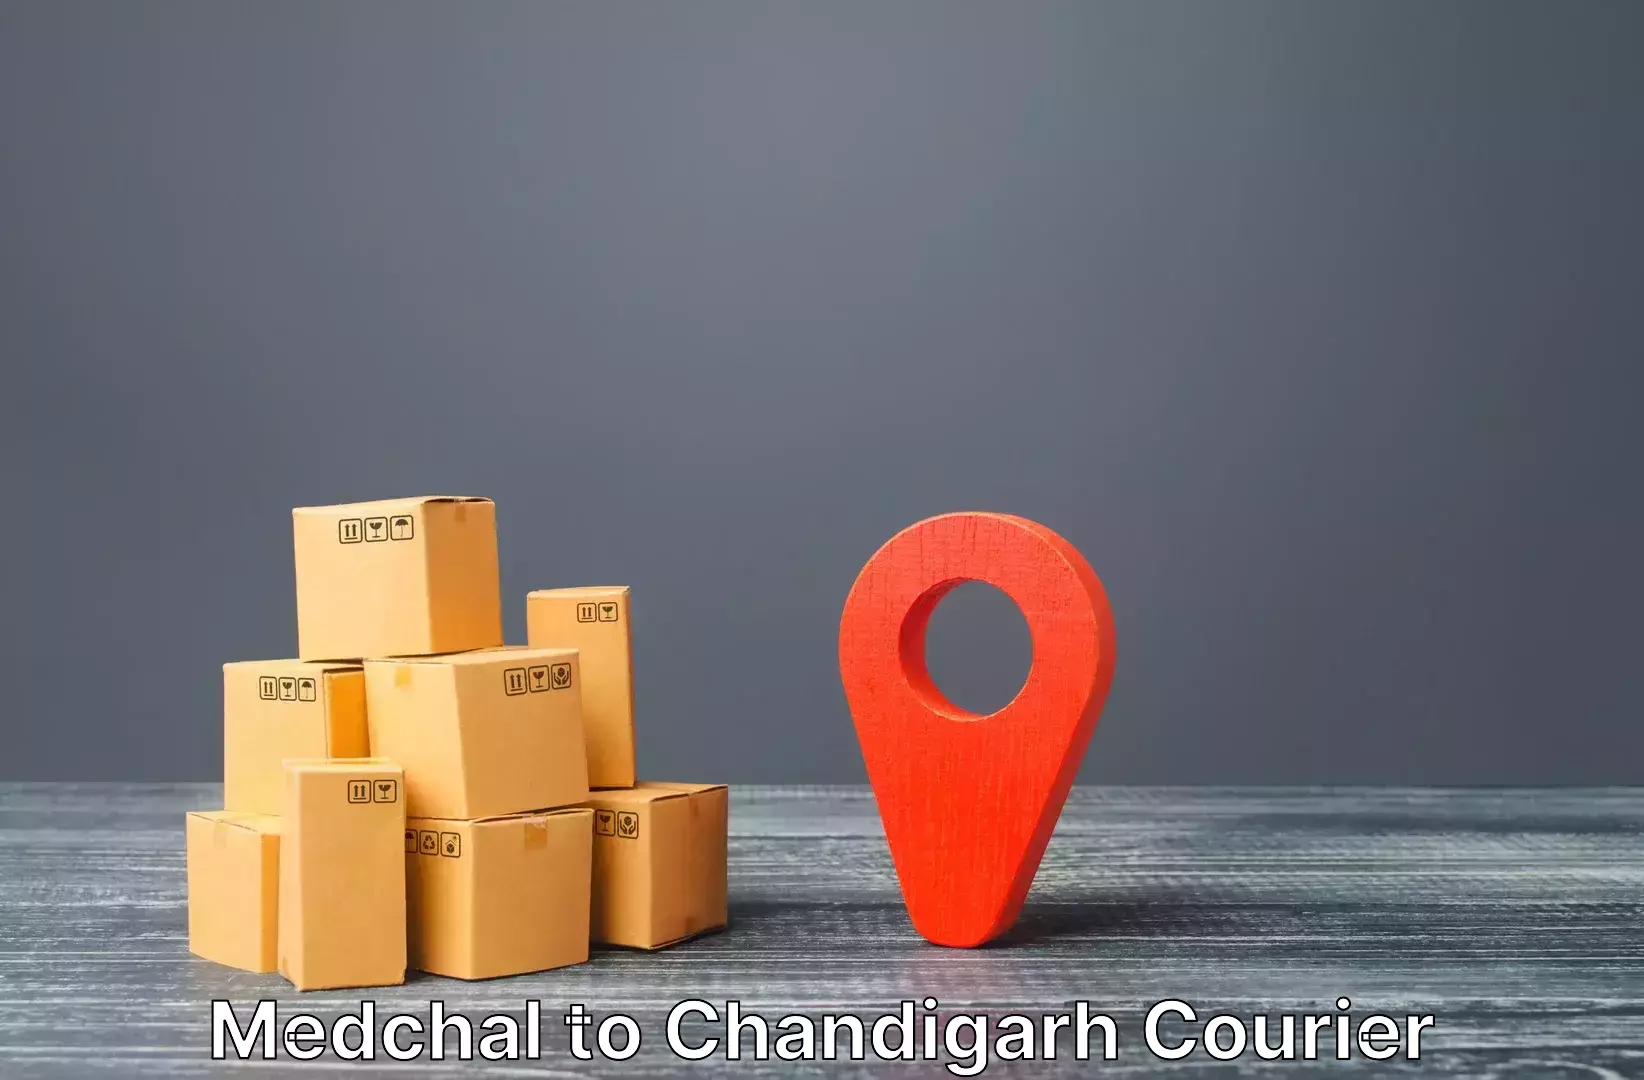 Baggage transport network Medchal to Chandigarh